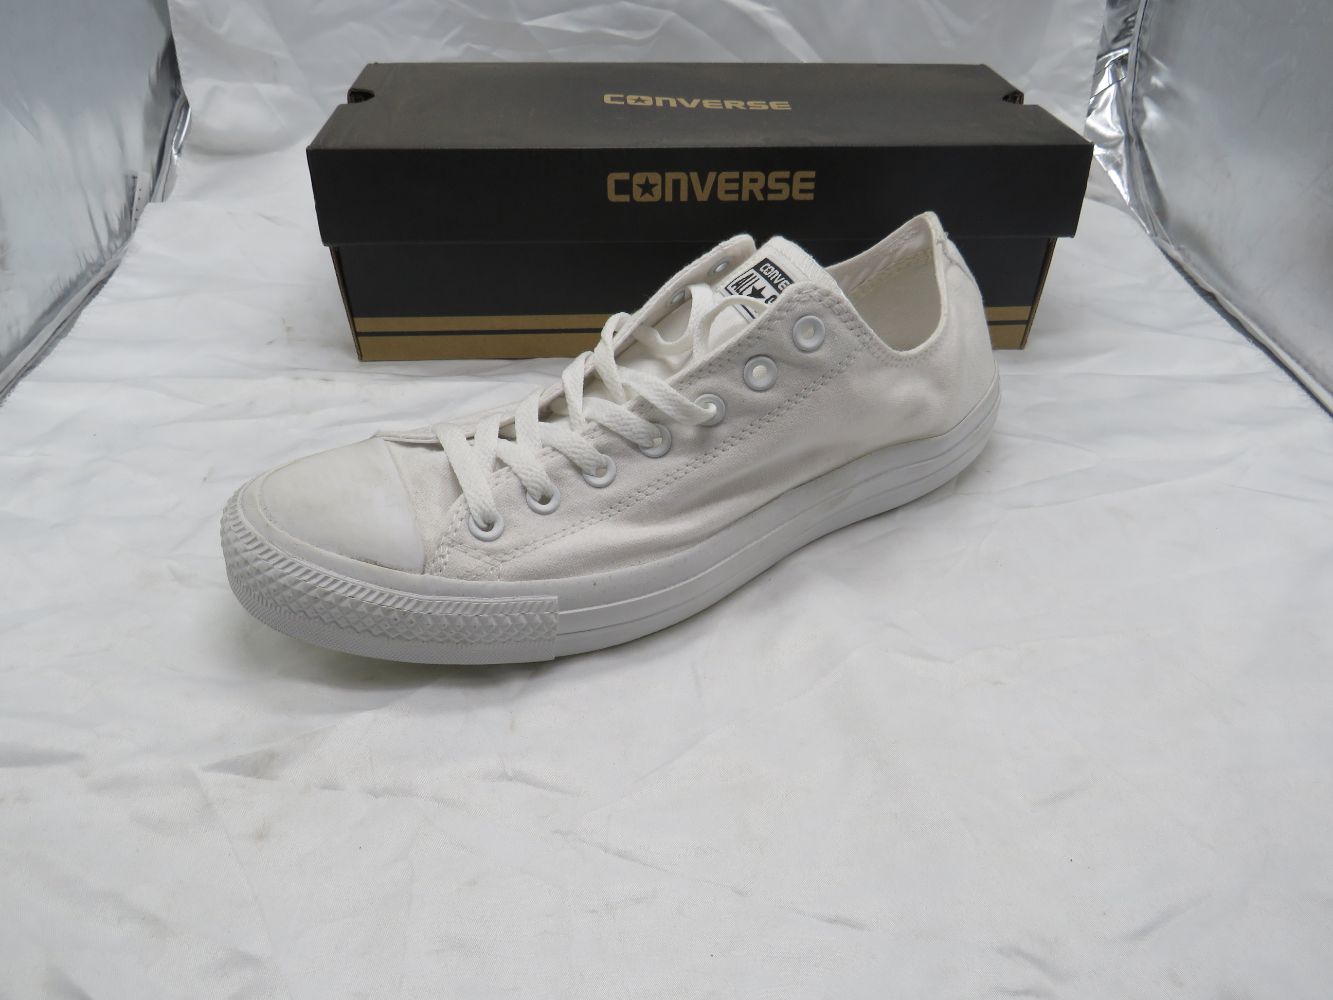 Converse Allstar trainers at £10 start